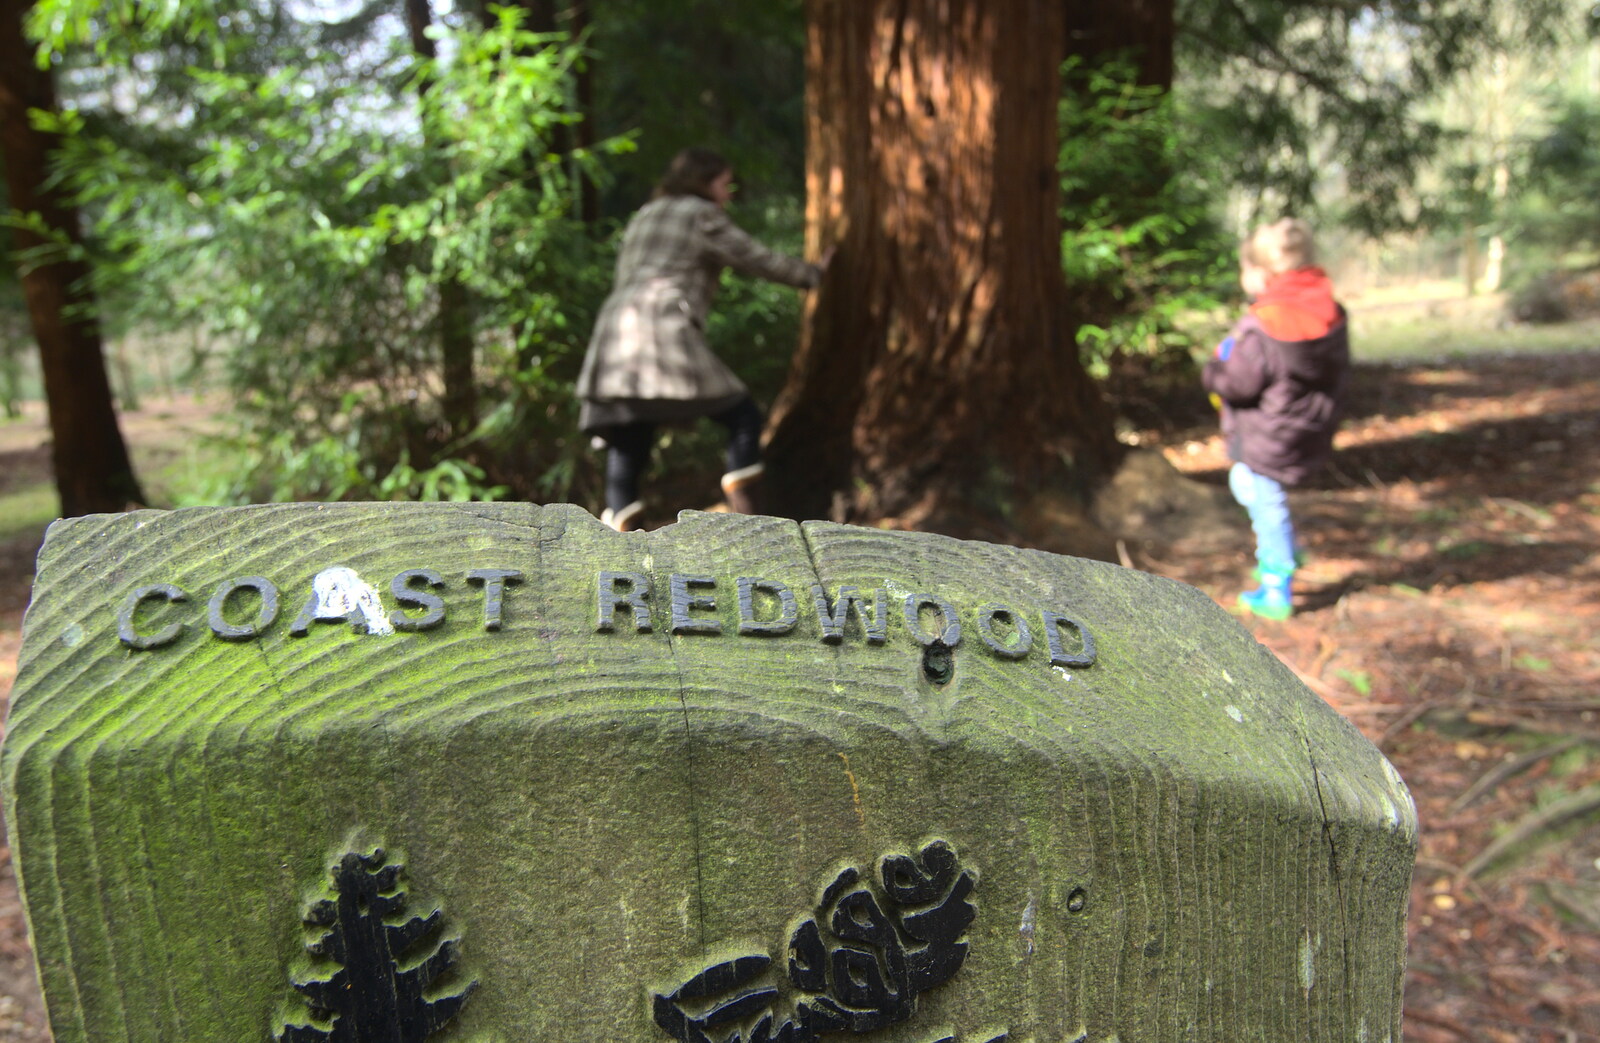 A Coast Redwood sign from The Ornamental Drive, Rhinefield, New Forest - 20th March 2013